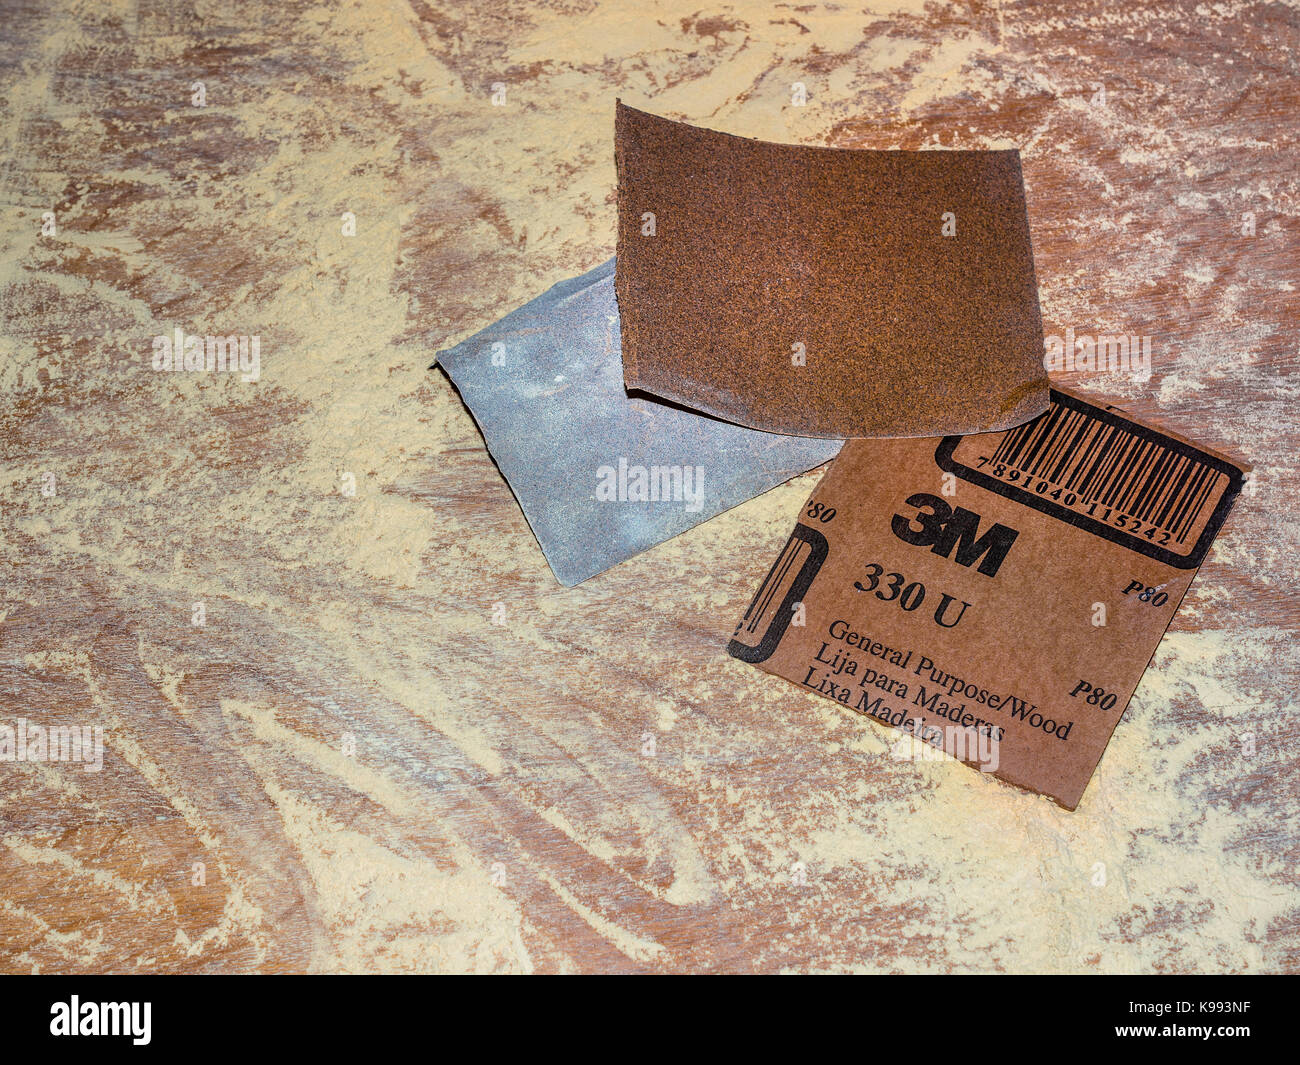 Sandpaper and sawdust on table top. Stock Photo